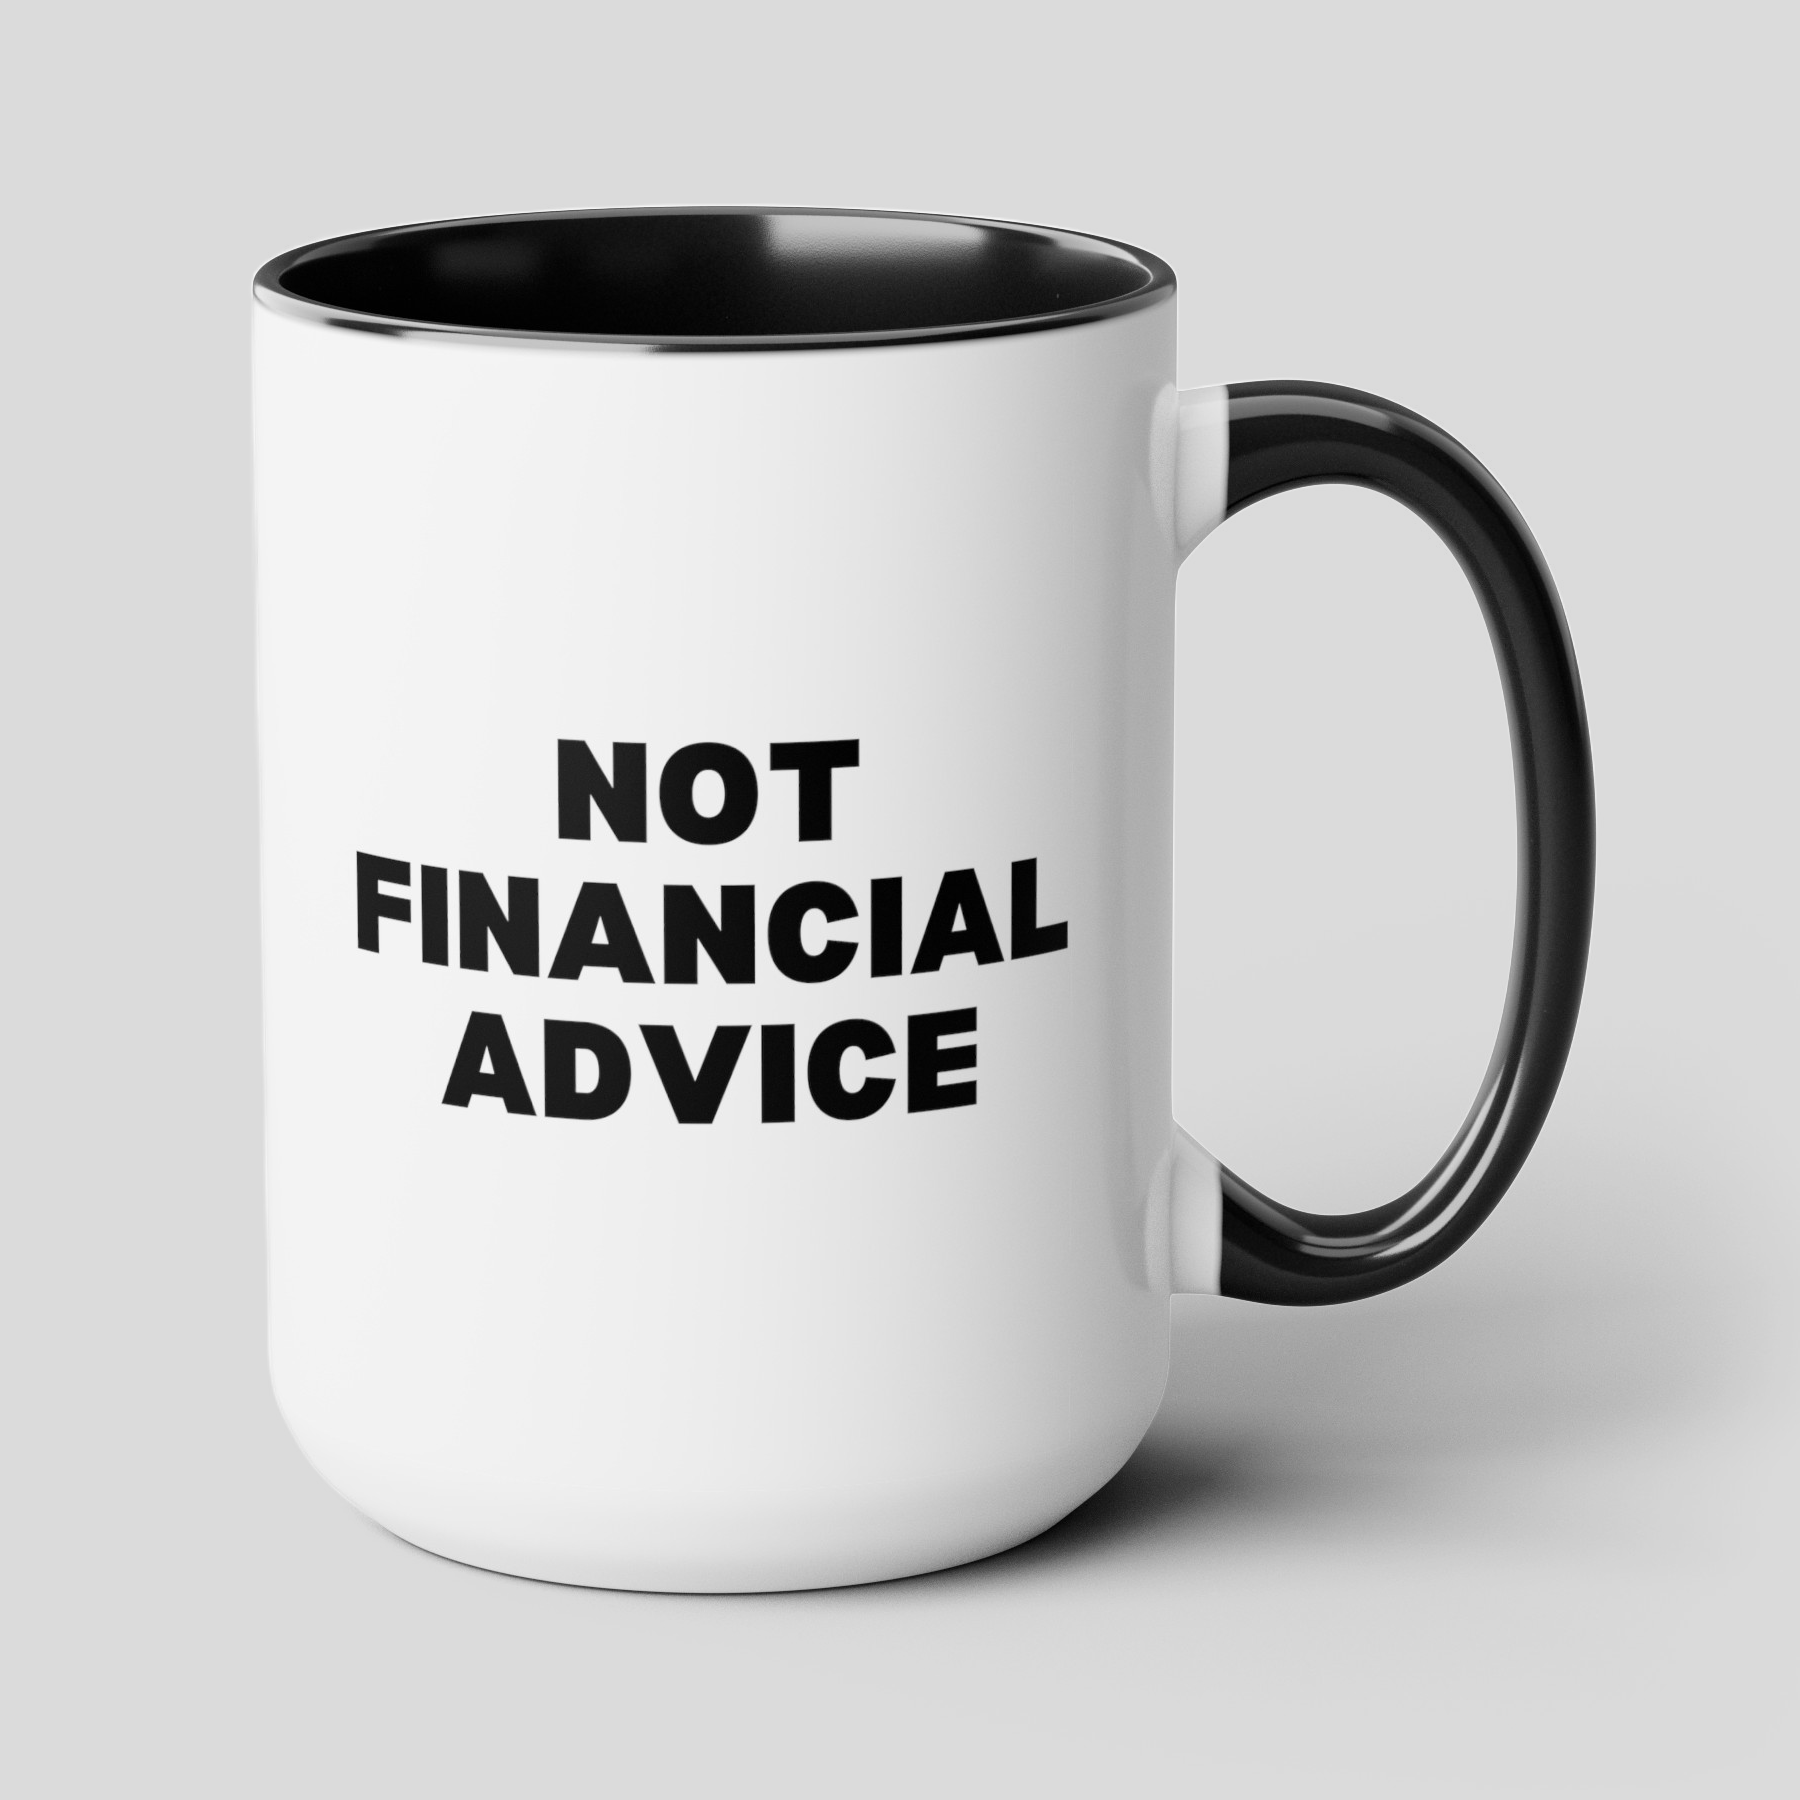 Not Financial Advice 15oz white with black accent funny large coffee mug gift for finance bro advisor specialist joke waveywares wavey wares wavywares wavy wares cover